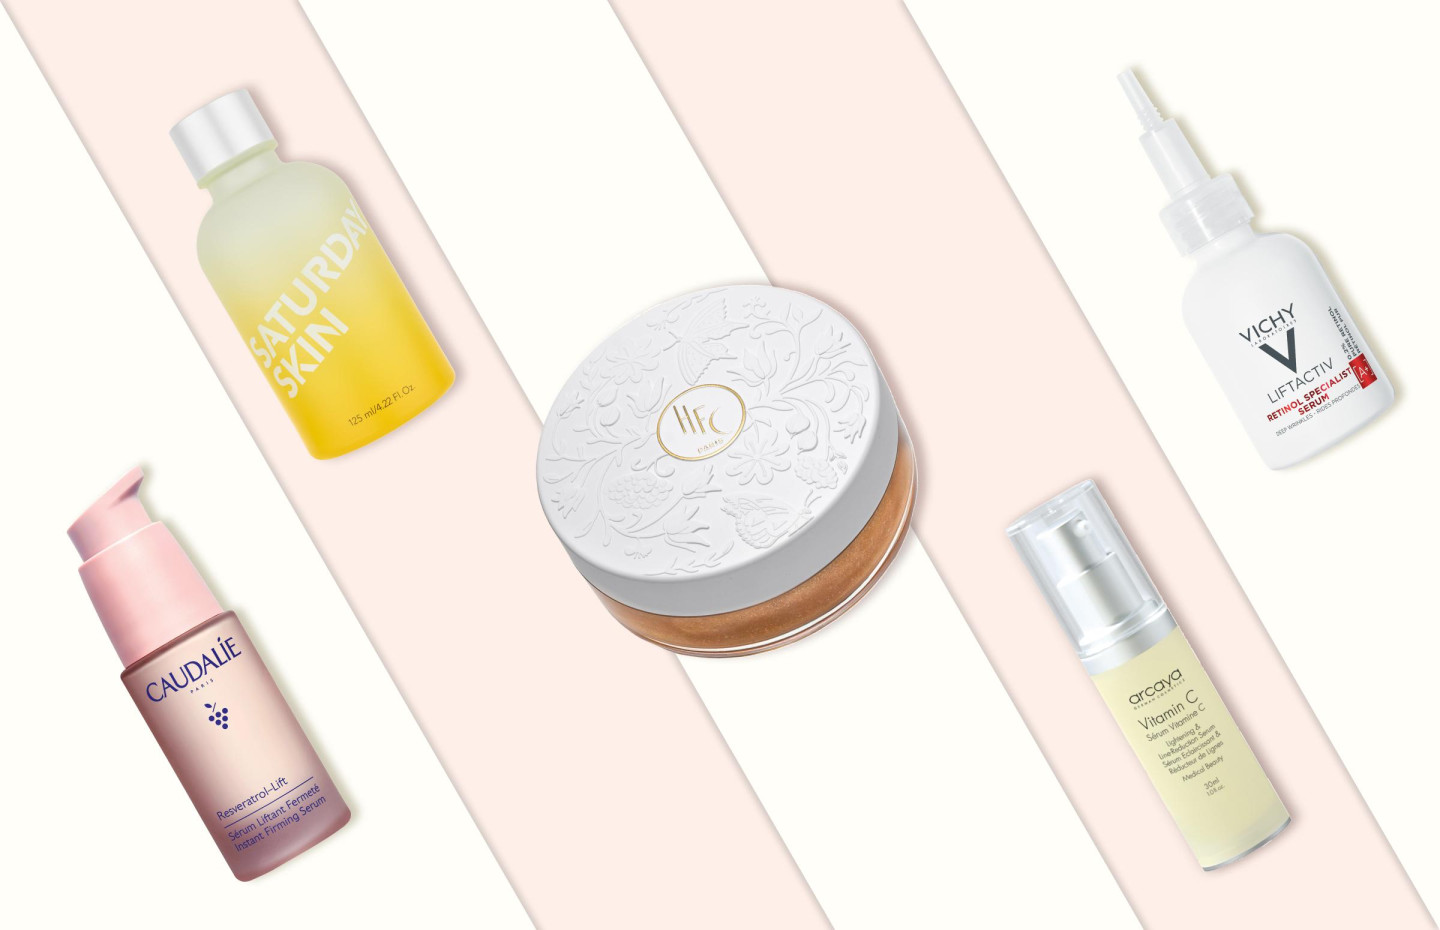 From sleep oil to shimmering body gel: beauty news of the week